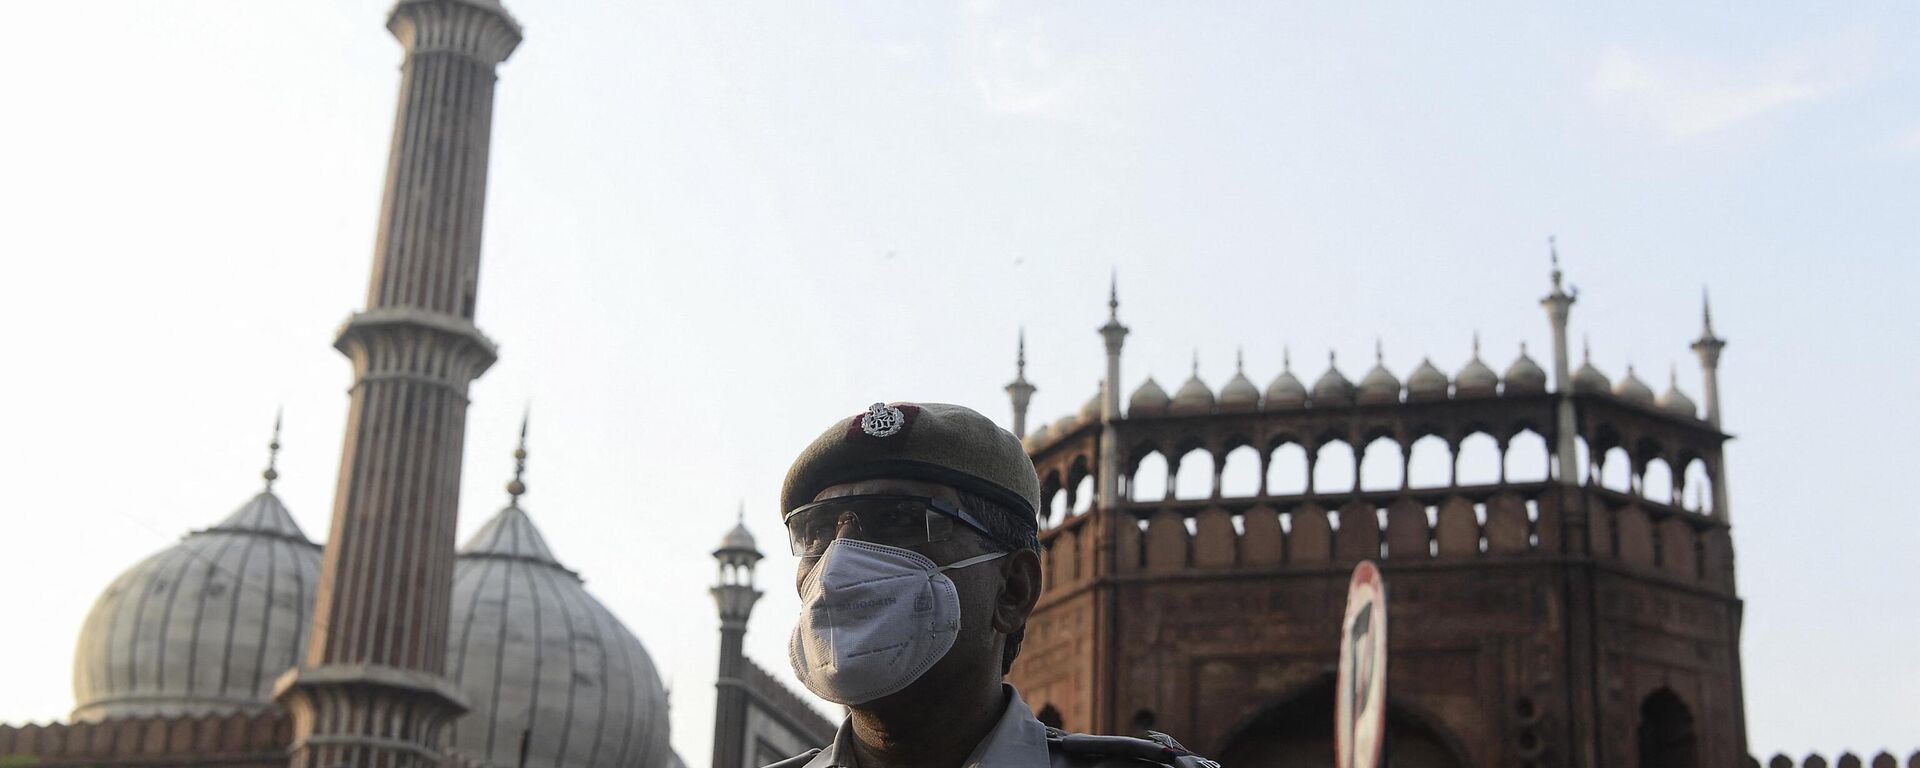 A police officer stands guard outside Jama Masjid during a government-imposed nationwide lockdown as a preventive measure against the spread of the COVID-19 coronavirus, in the old quarters of New Delhi on April 25, 2020. (Photo by SAJJAD HUSSAIN / AFP) - Sputnik India, 1920, 10.01.2023